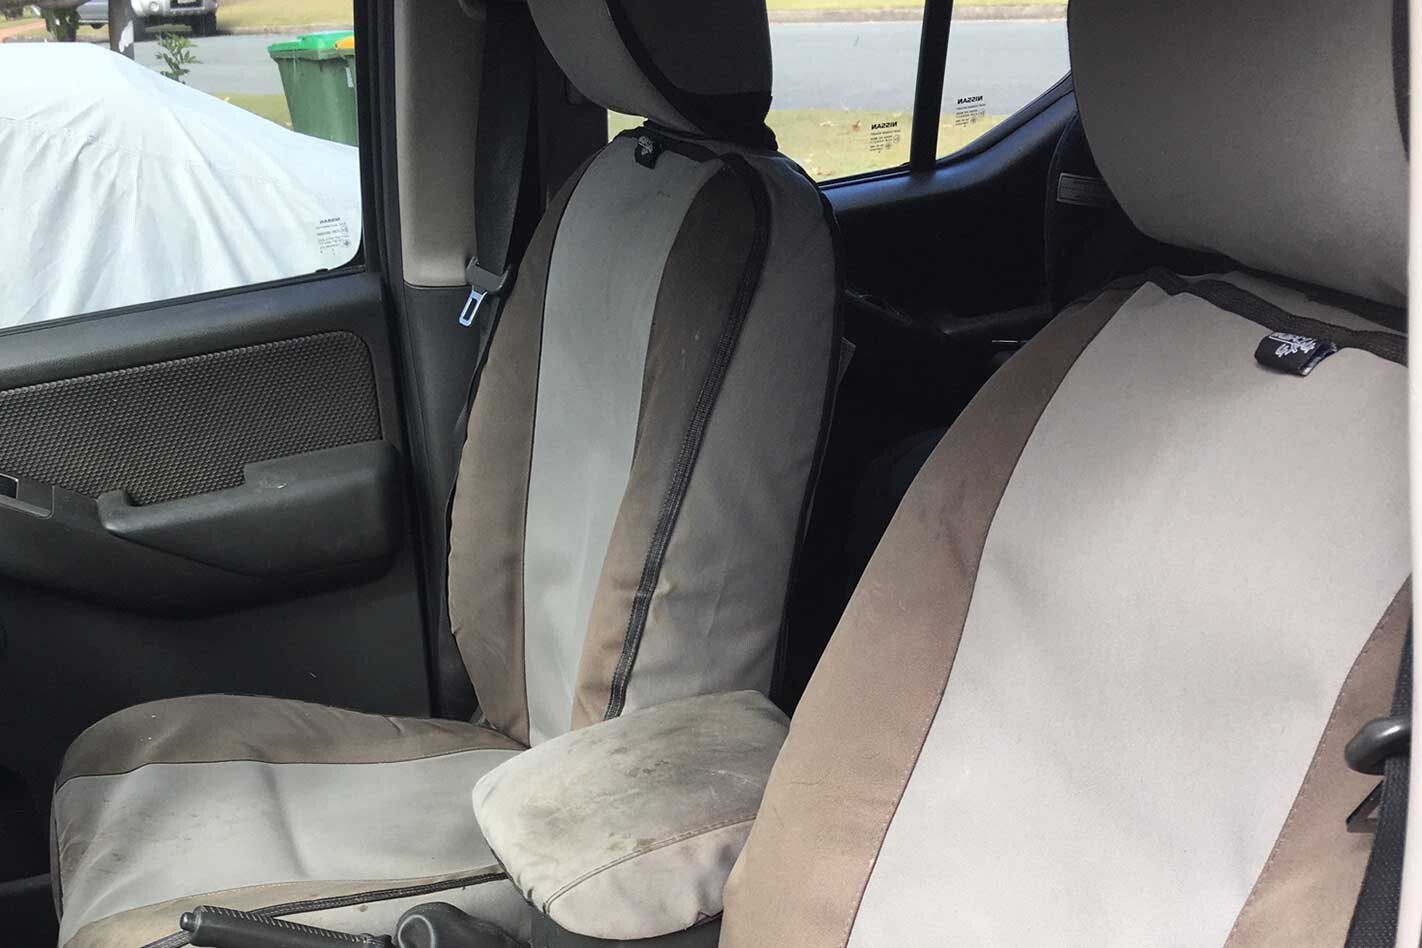 Msa Canvas Seat Covers Review - How To Clean Msa Canvas Seat Covers